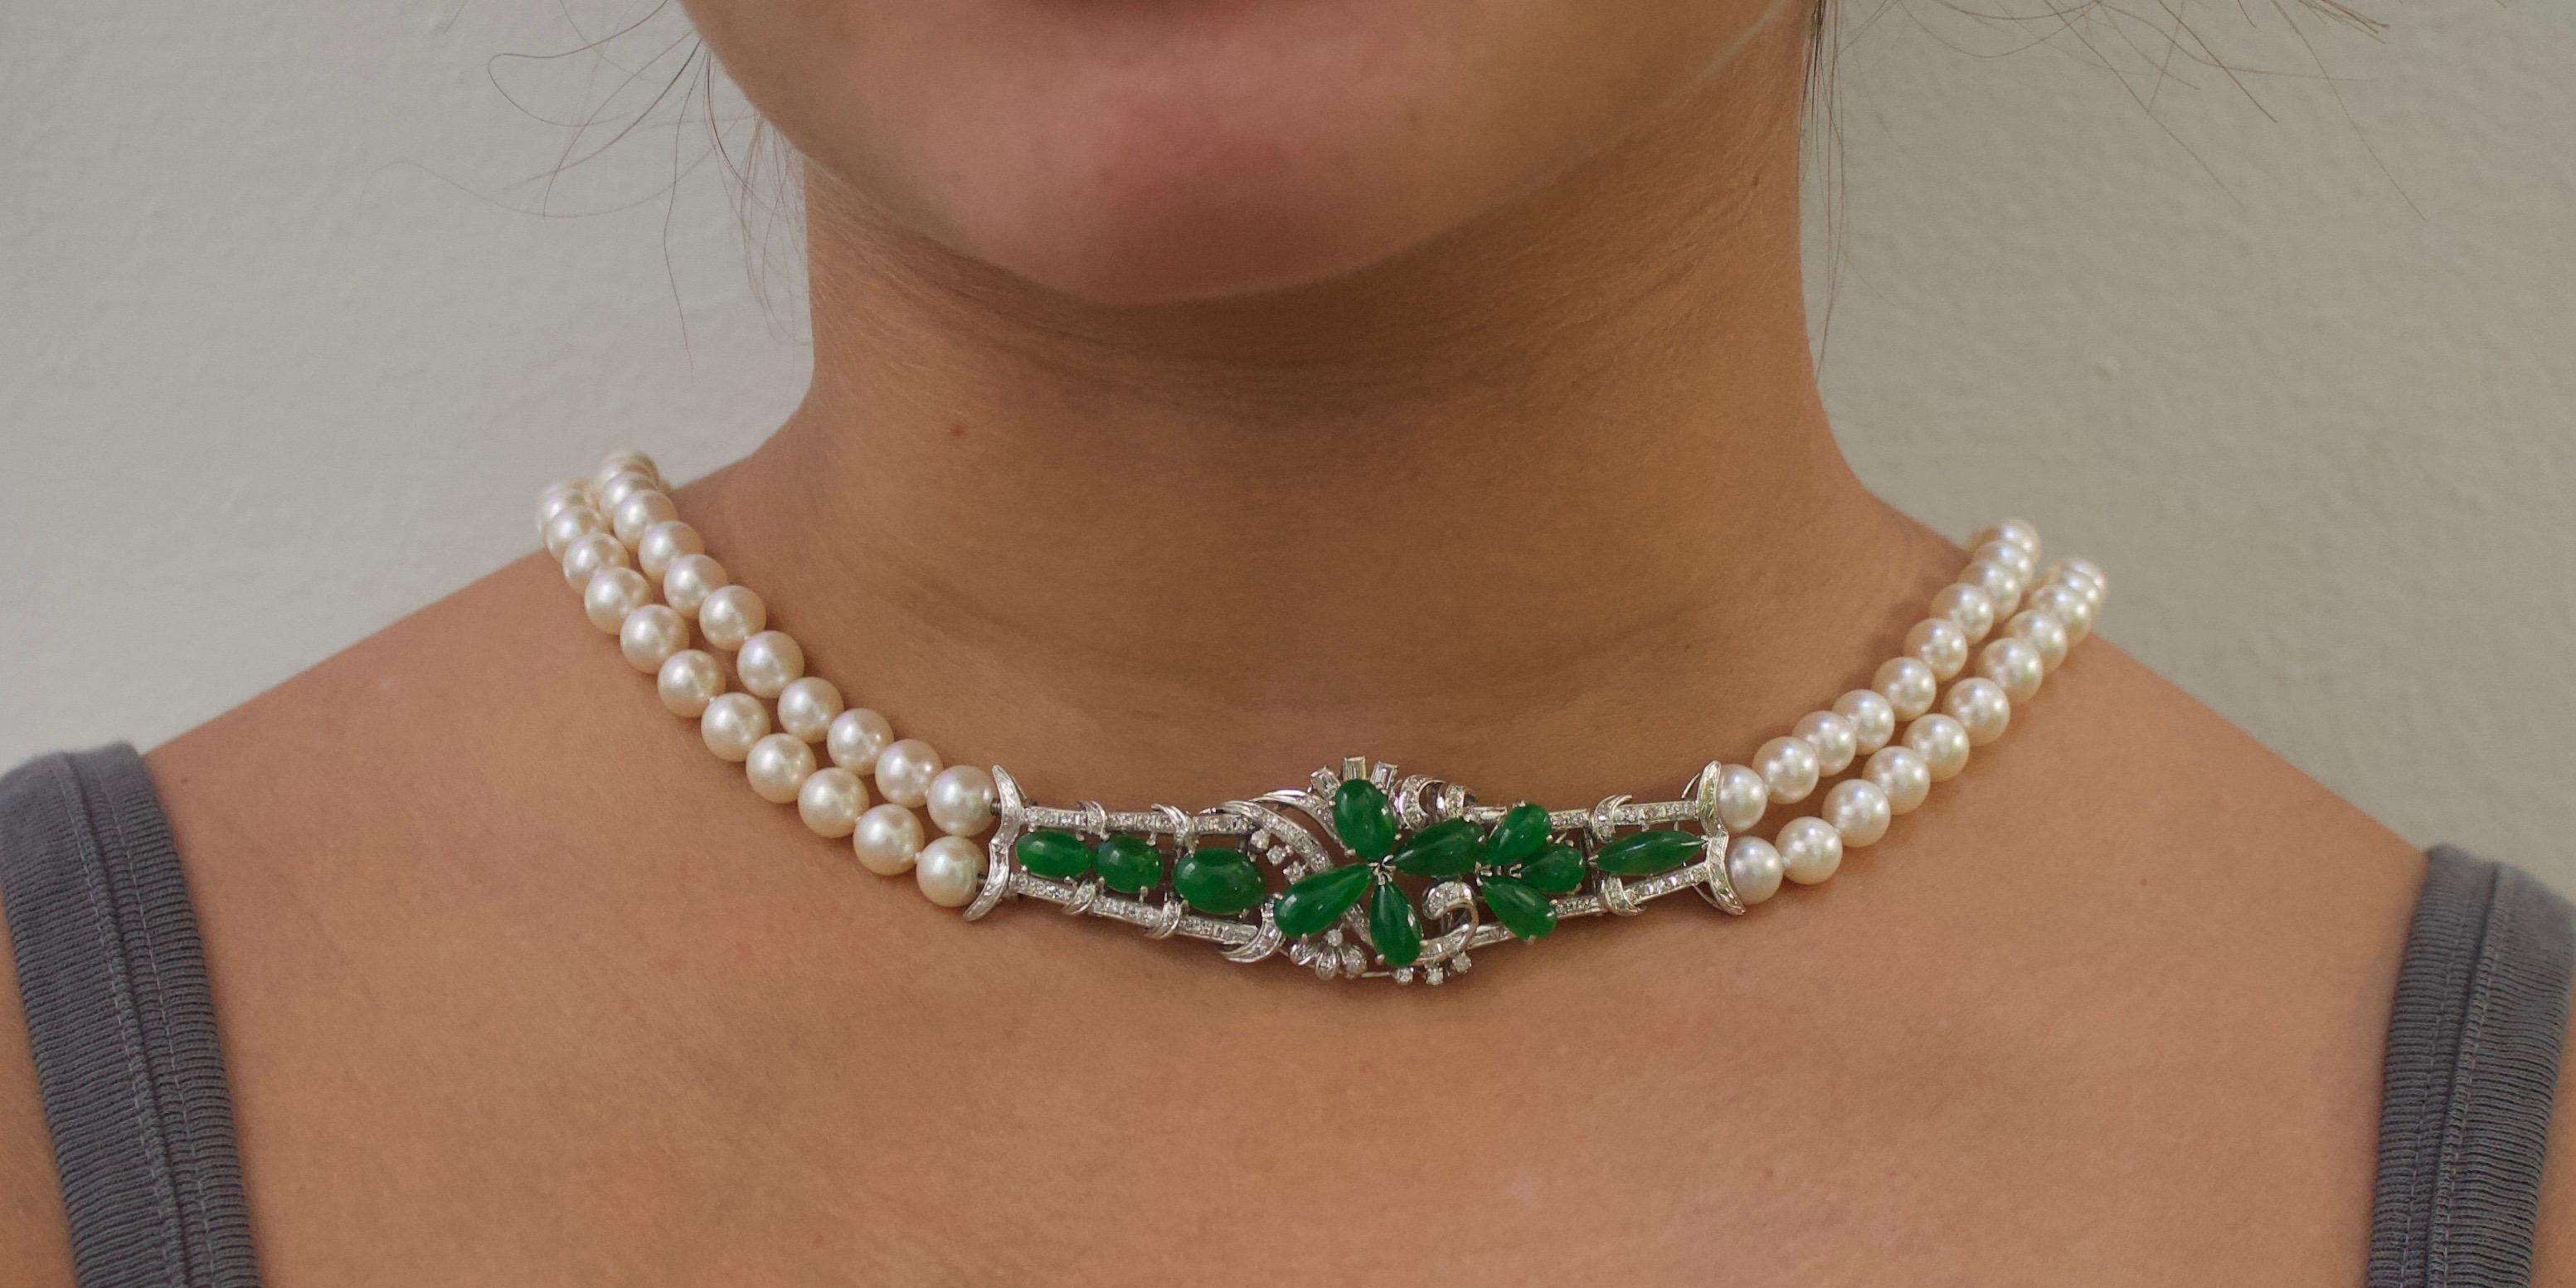 Jade Diamond and Pearl Strand Necklace Circa 1950's 
We Tried To Count The Ways This Can be Worn and Lost Count!
11 Fancy Shaped Cabochon Jadeites 
70 Round Brilliant Cut Diamonds Weighing .70 Carats Approximately 
123 Round Cultured Pearls. 7 - 7.5